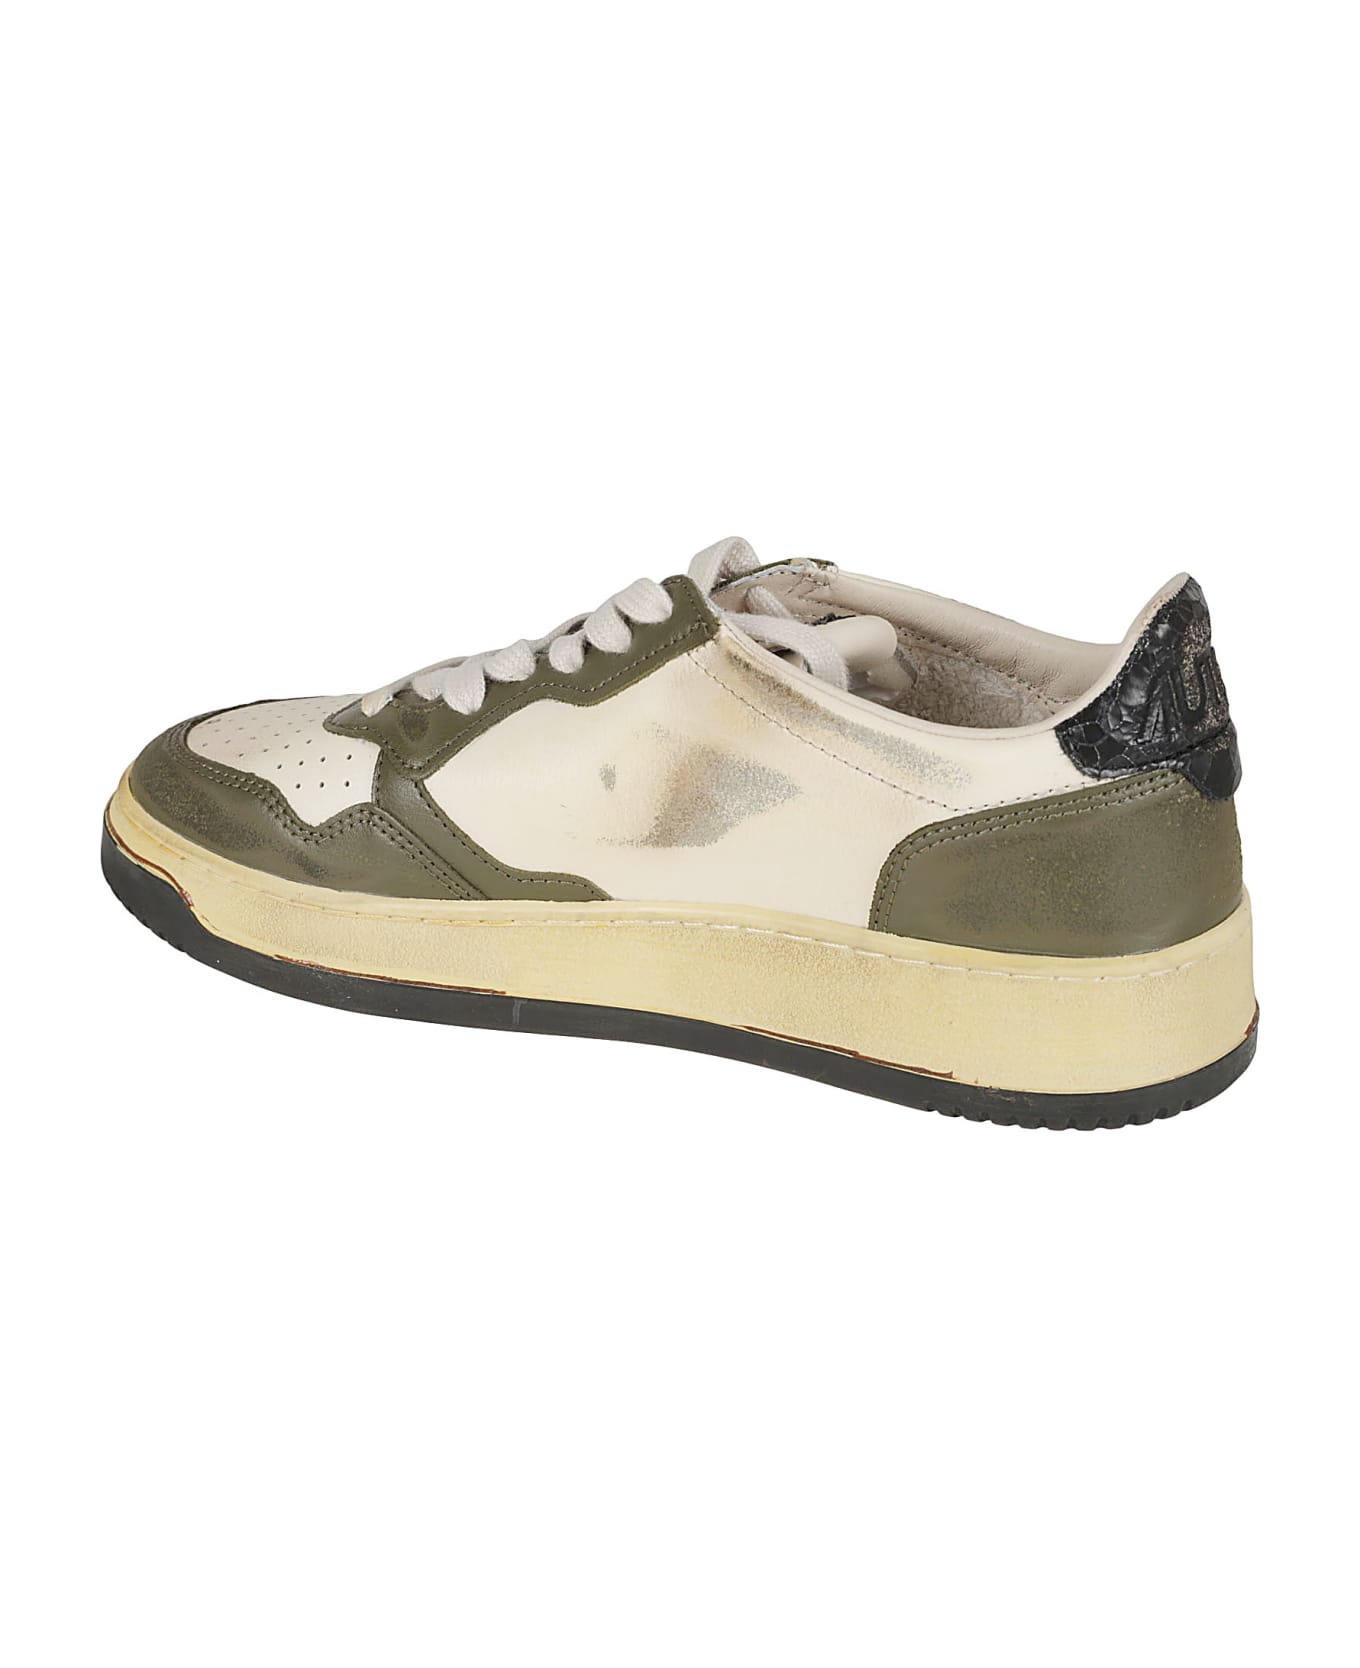 Autry Sup Vintage Low Man Sneakers - WHITE/OLIVE スニーカー